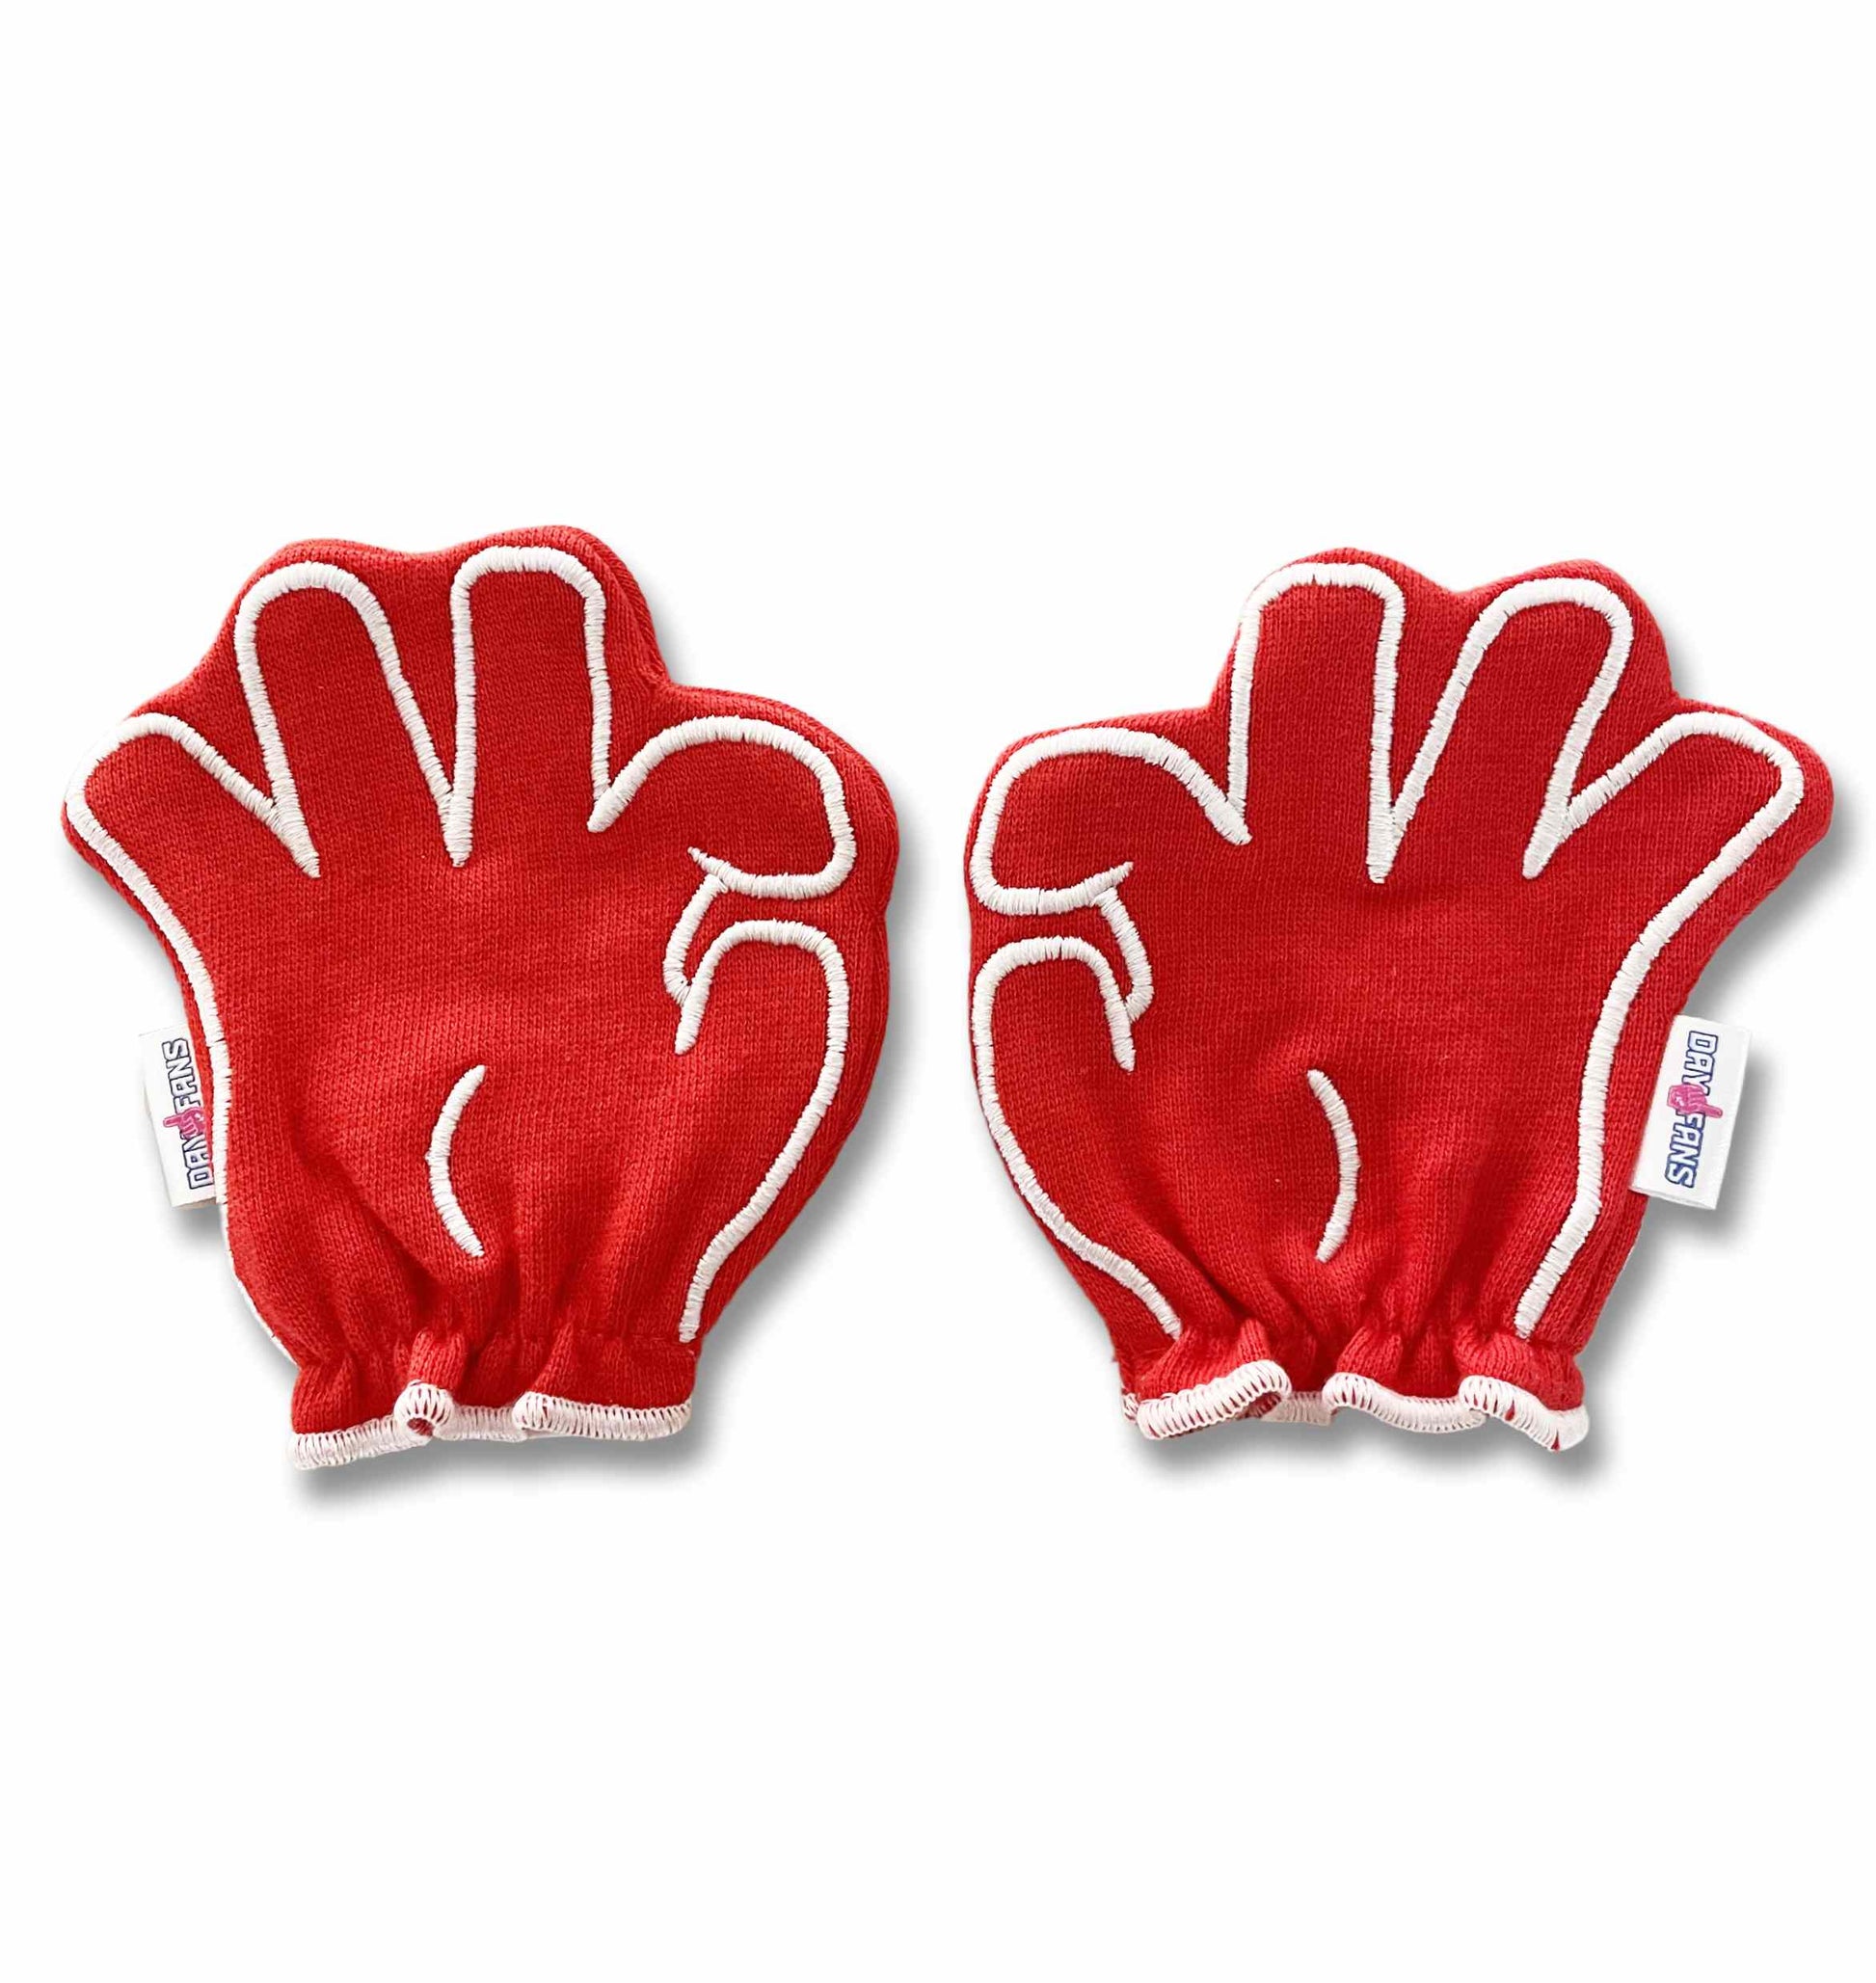 Arizona Bear Down FanMitts Baby Mittens Red Front Pair